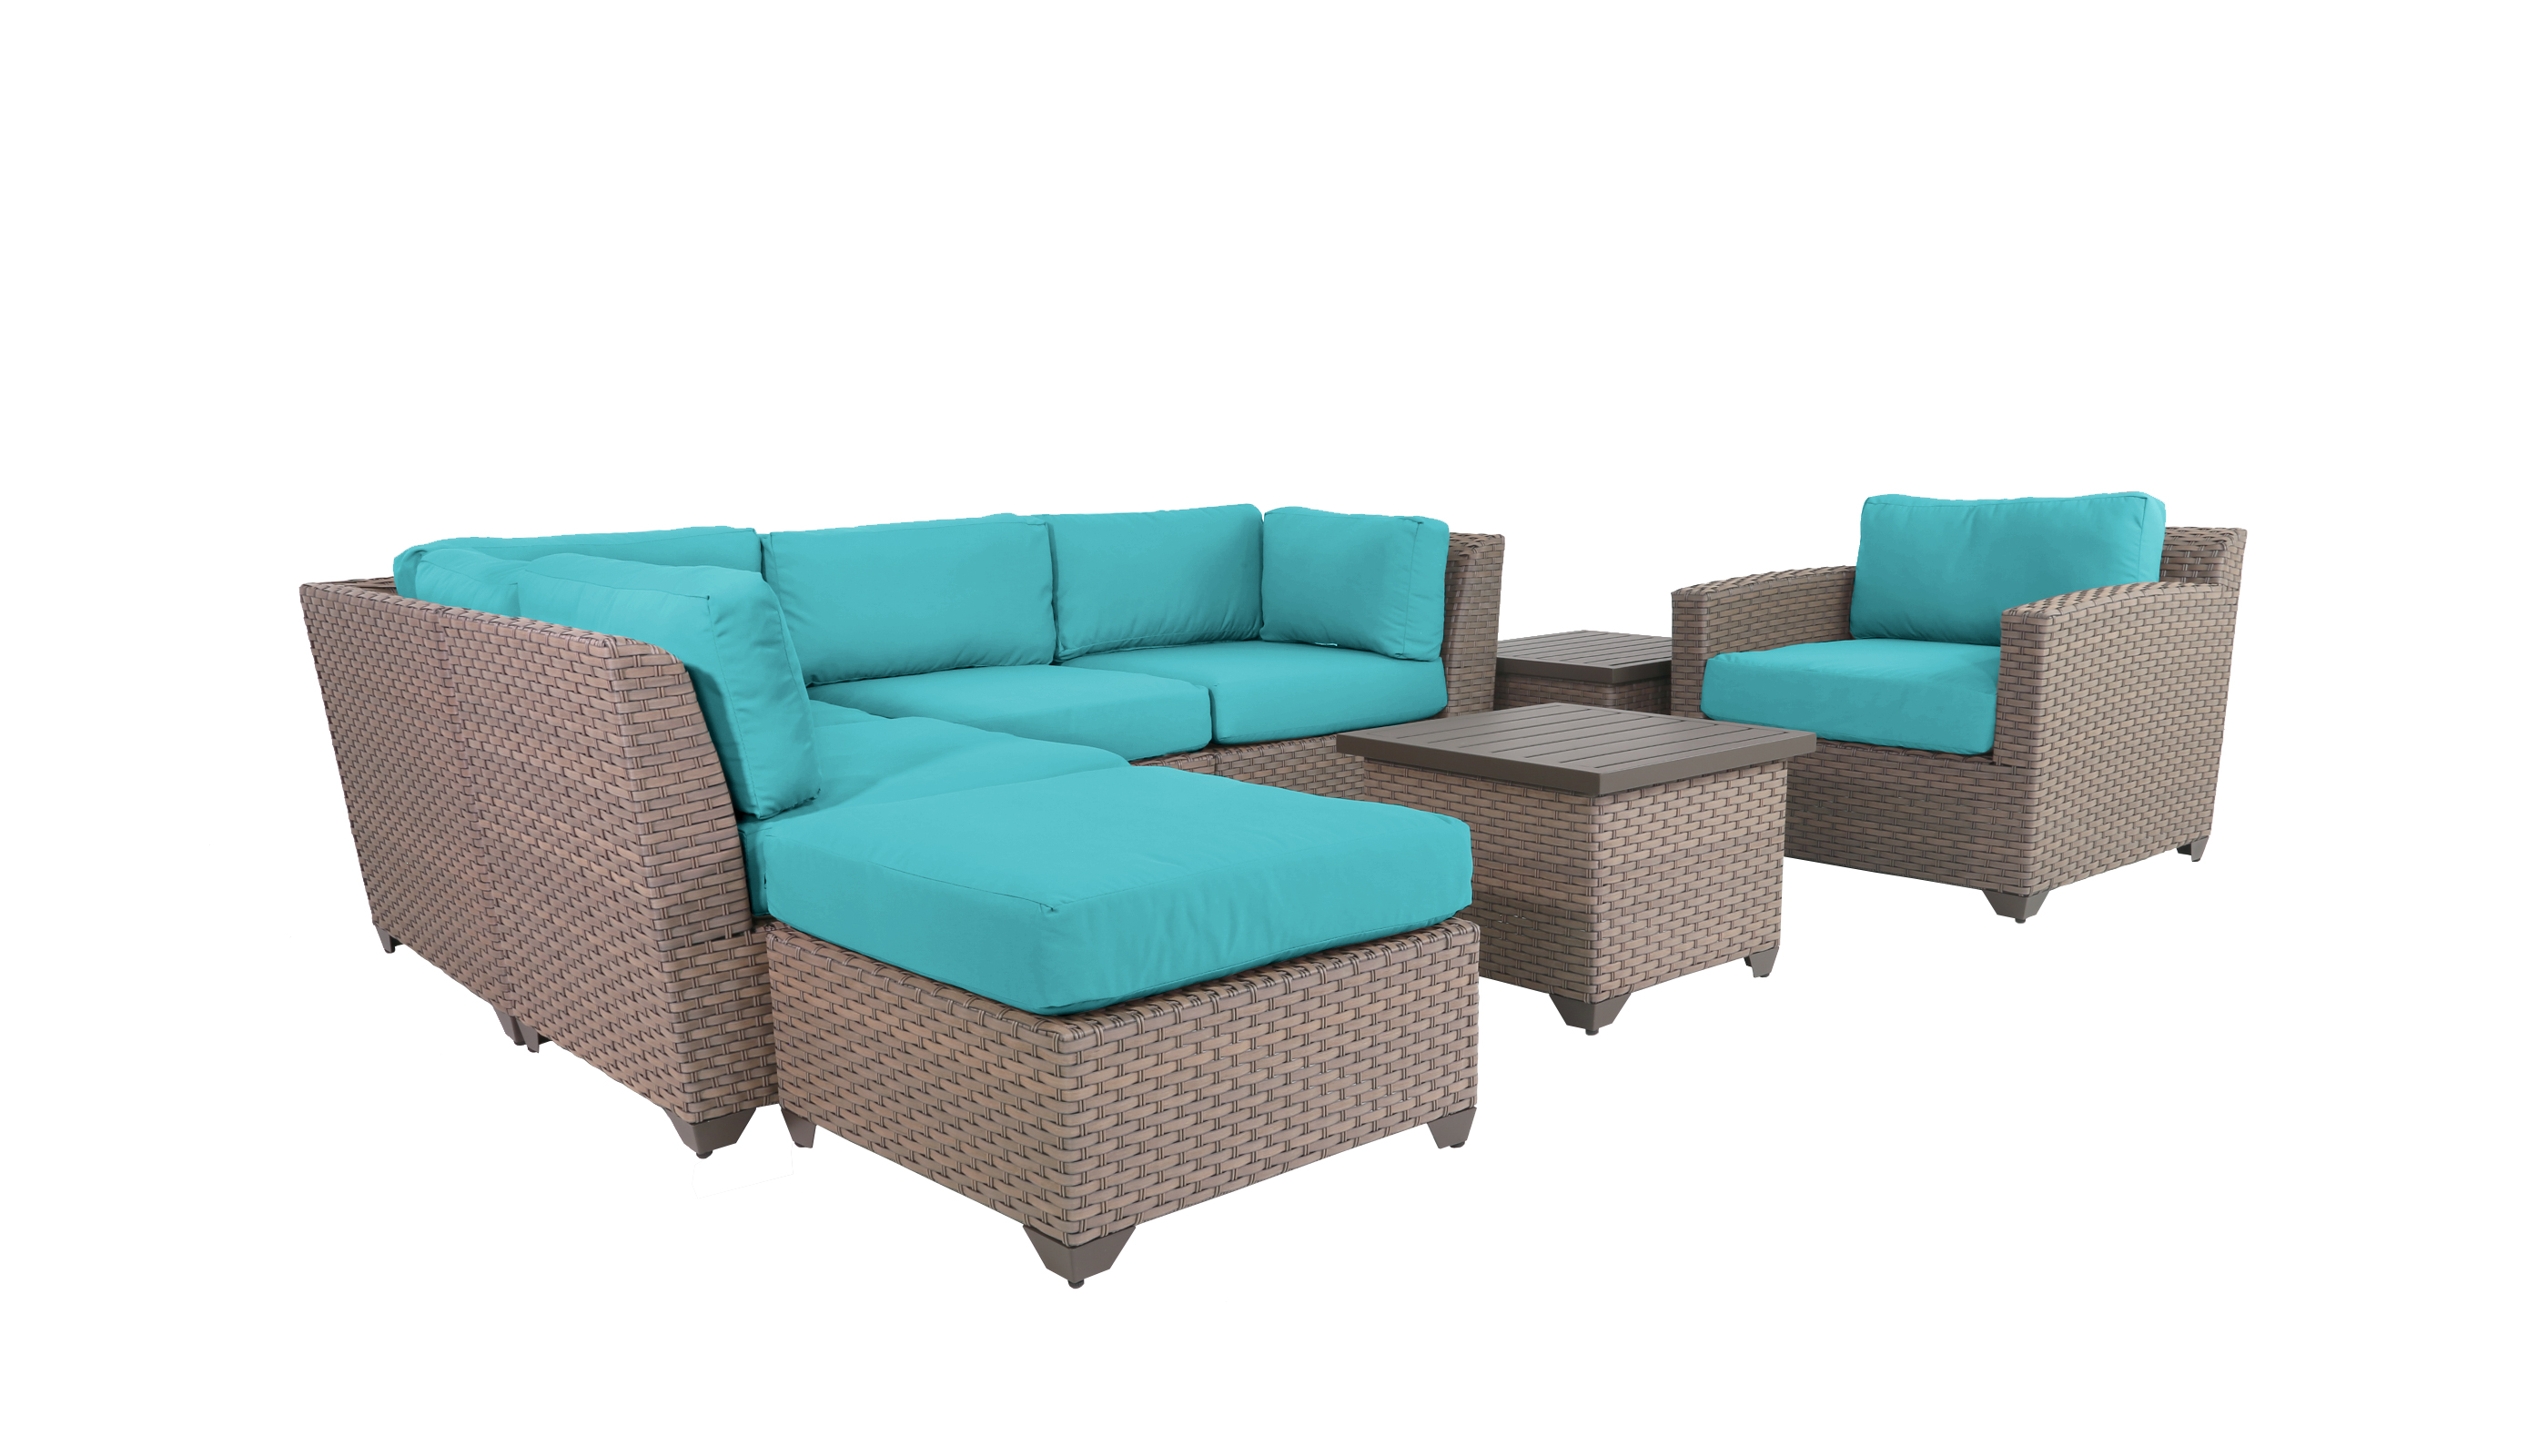 TK Classics Florence Wicker 8 Piece Patio Conversation Set with End Table and 2 Sets of Cushion Covers - image 4 of 12